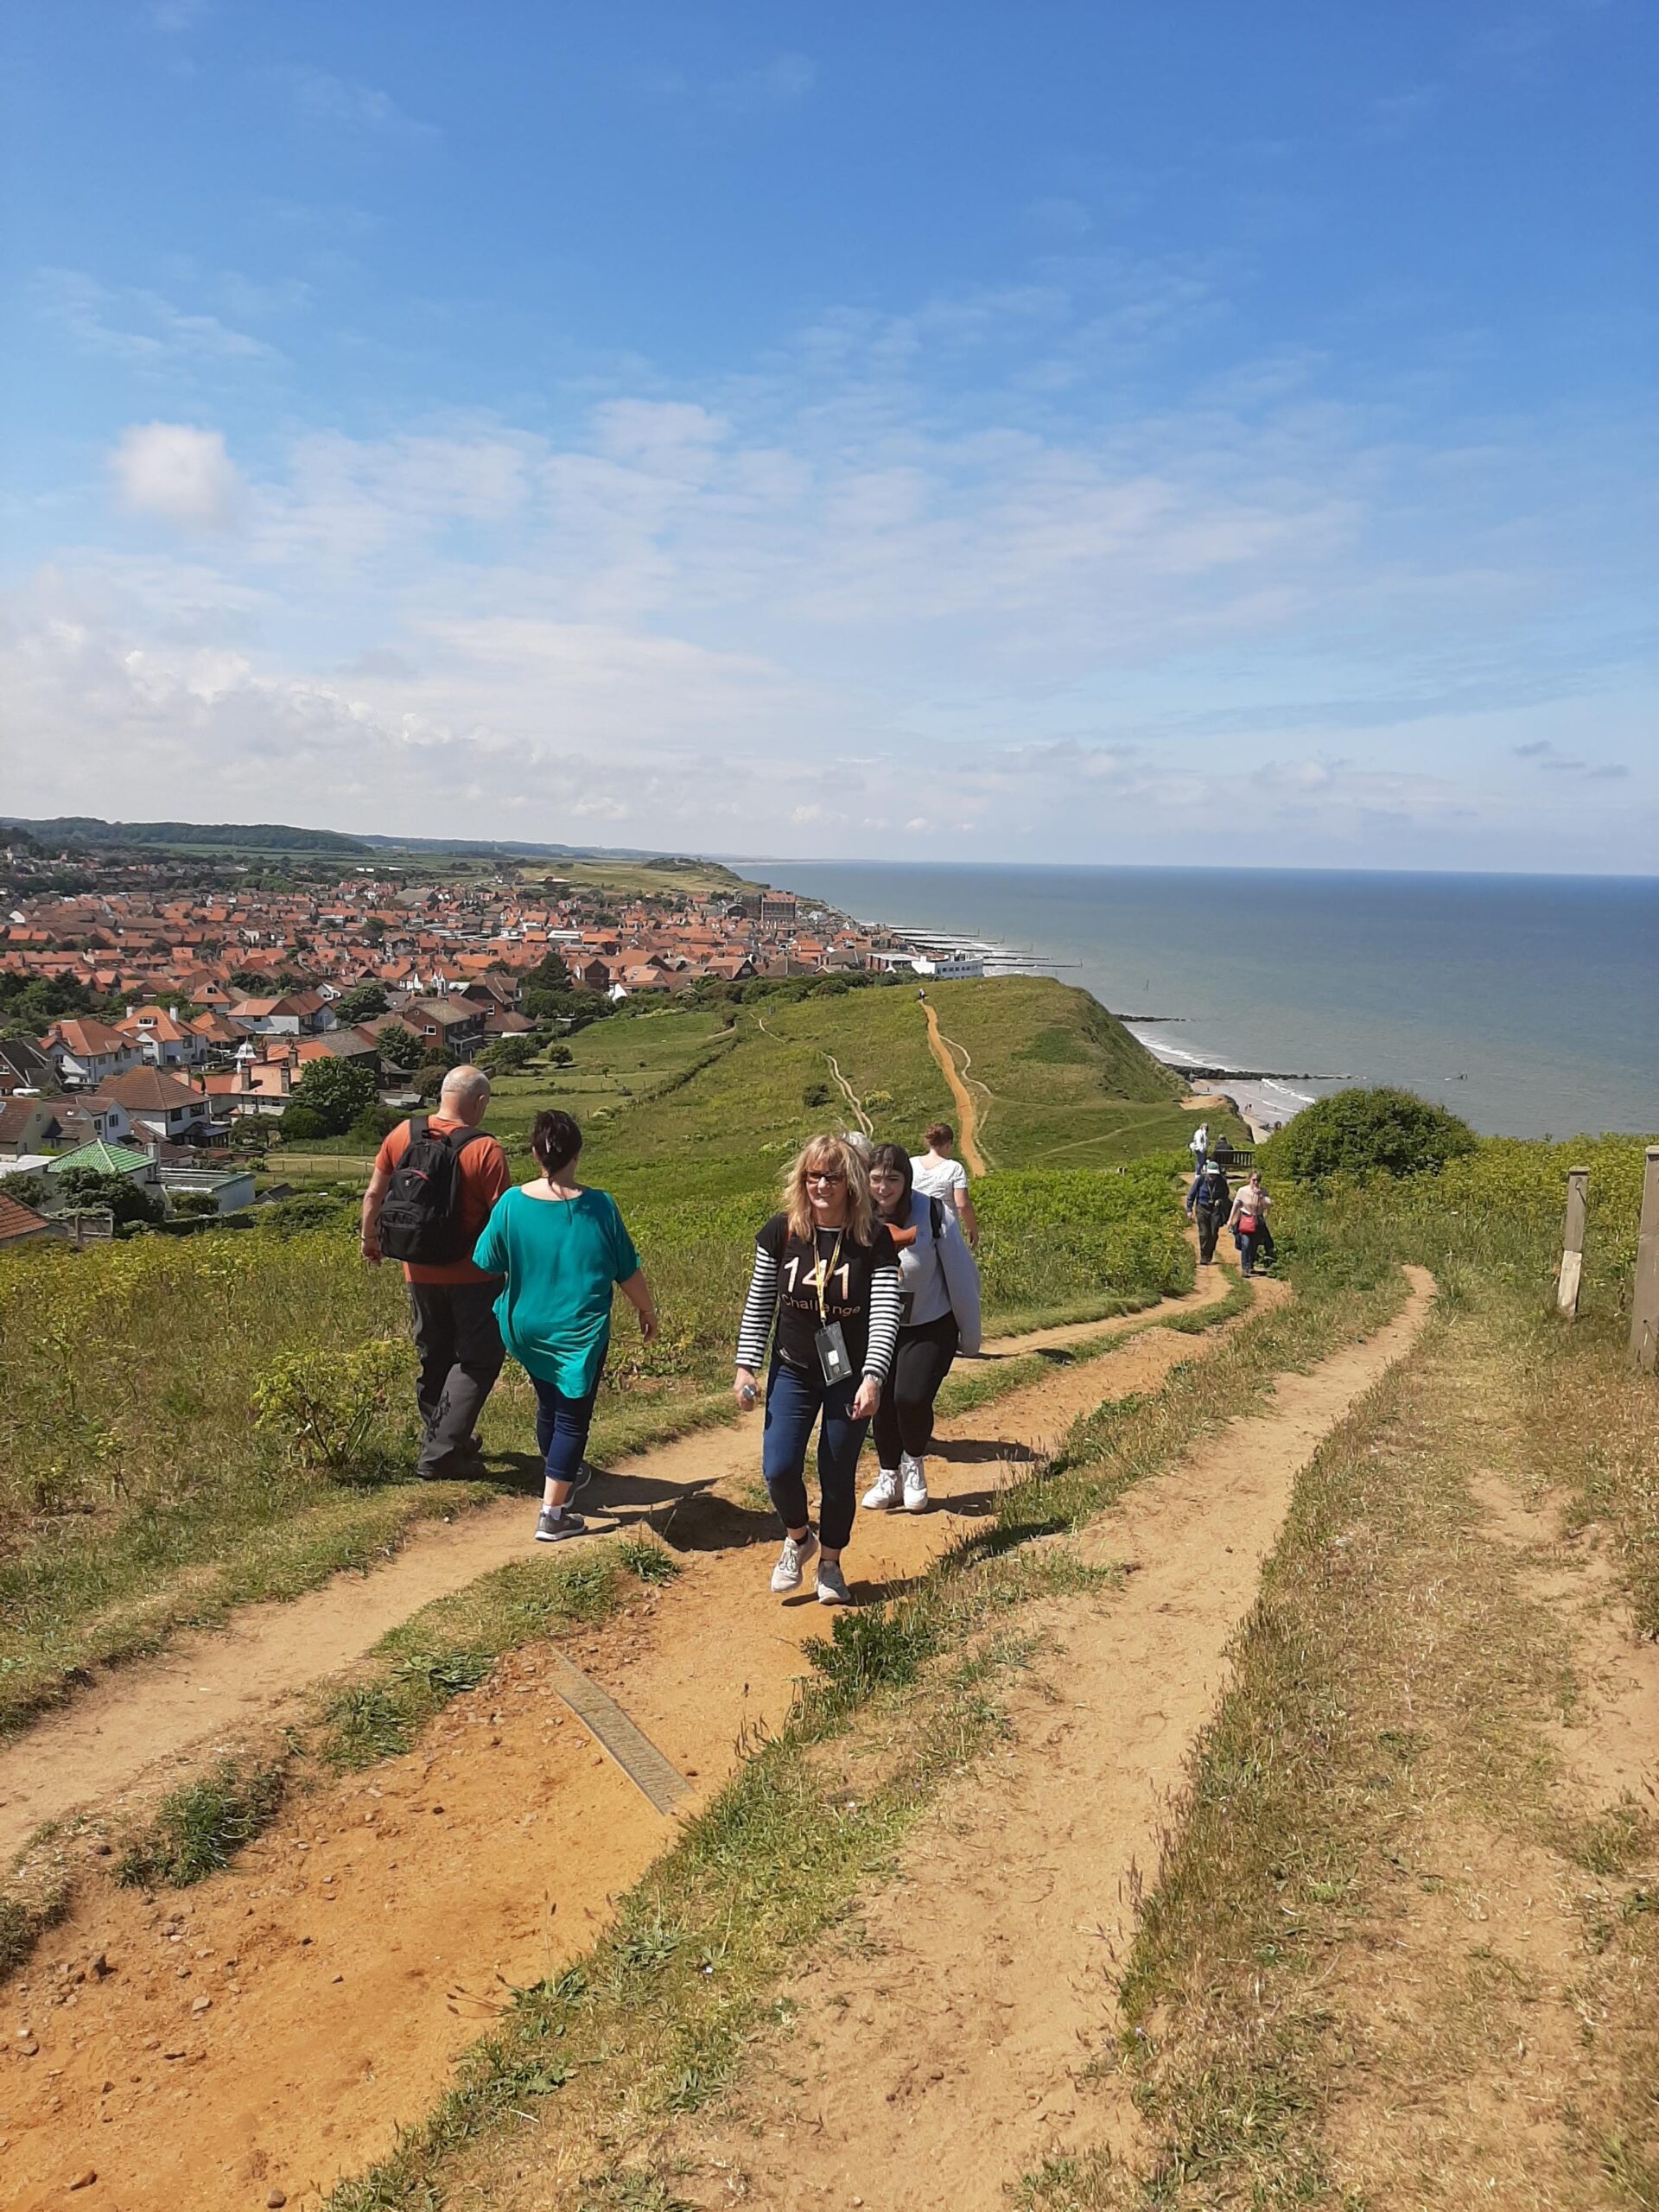 141 Challenge : Photos from our coastal walk